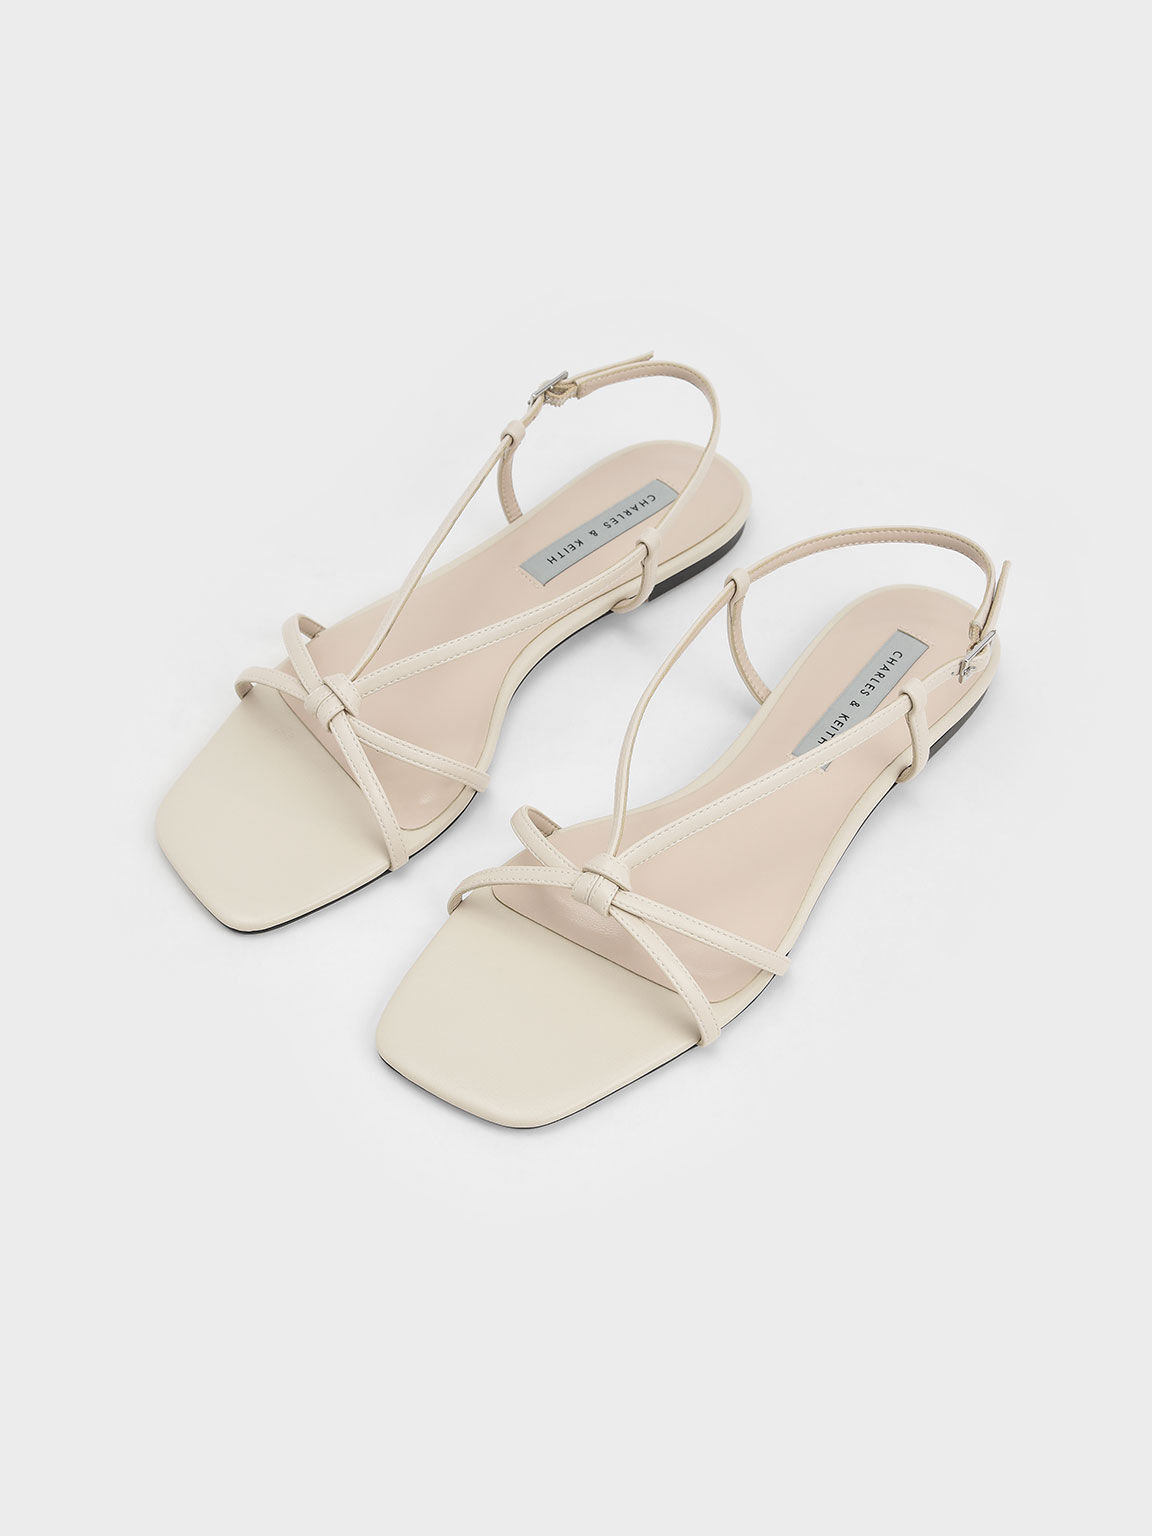 Strappy Knotted Slingback Sandals, Chalk, hi-res